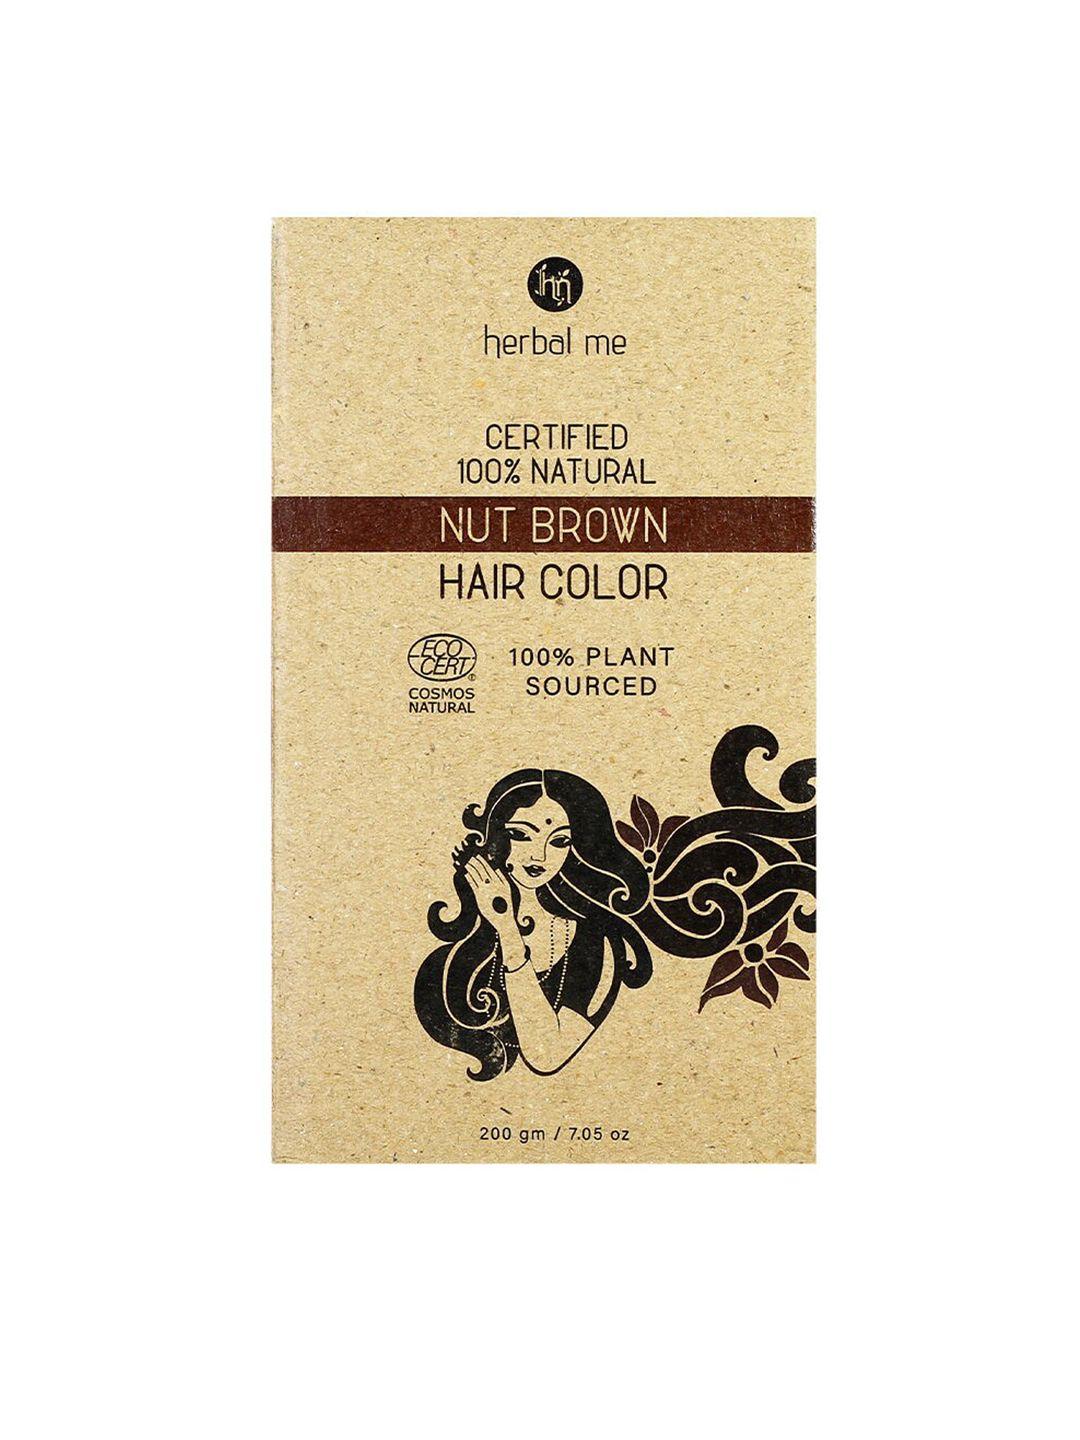 herbal me certified 100% natural hair colour 200 g - nut brown